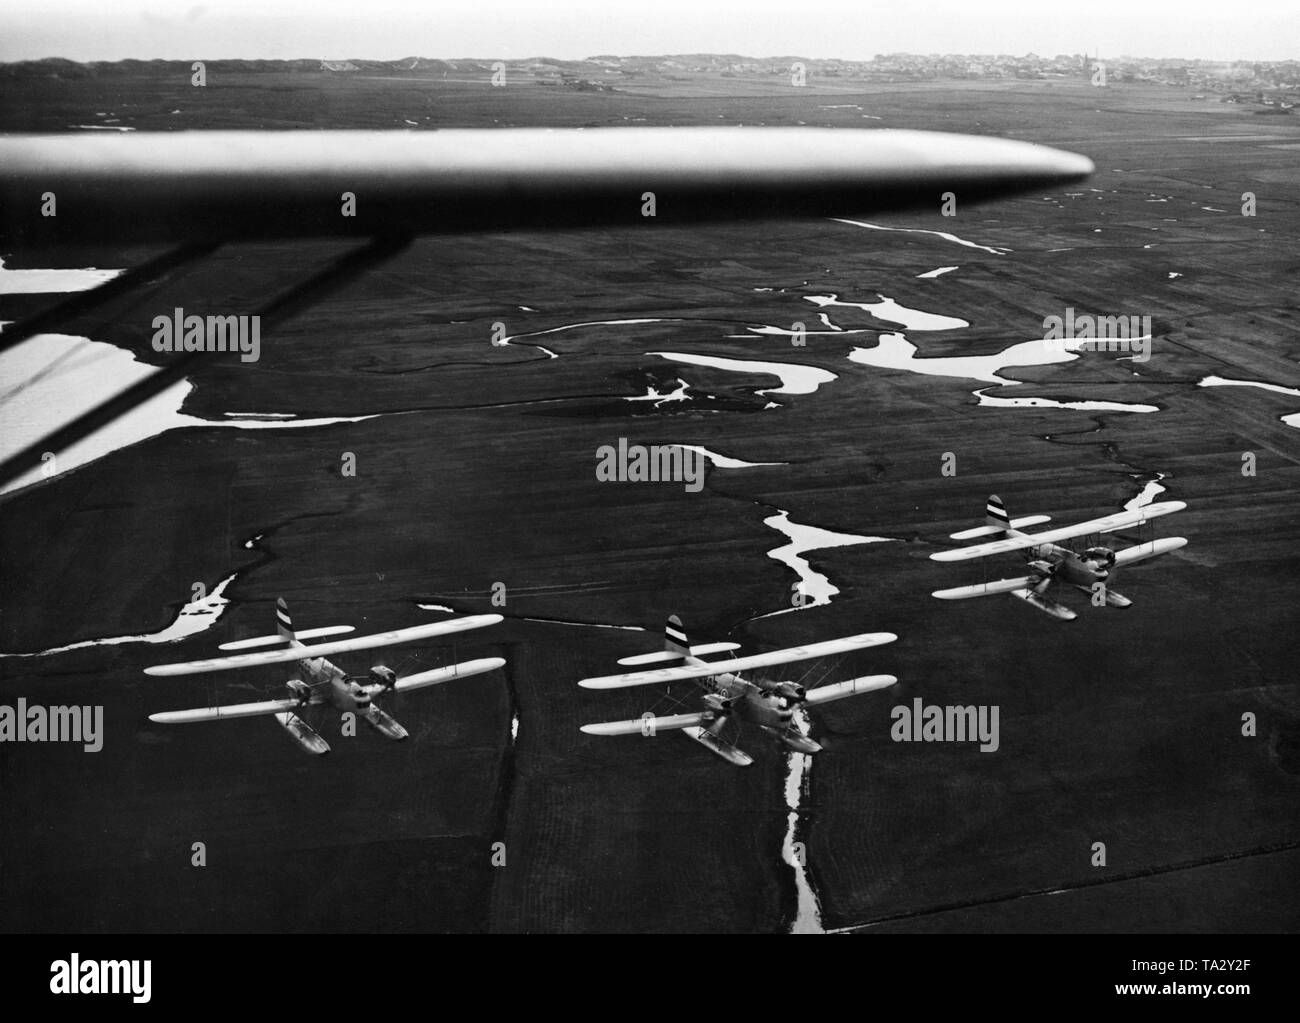 A formation of 3 two-engine multi seat combat aircrafts fly over an area of the Wadden Sea. These are Heinkel He 59 aircrafts. Stock Photo